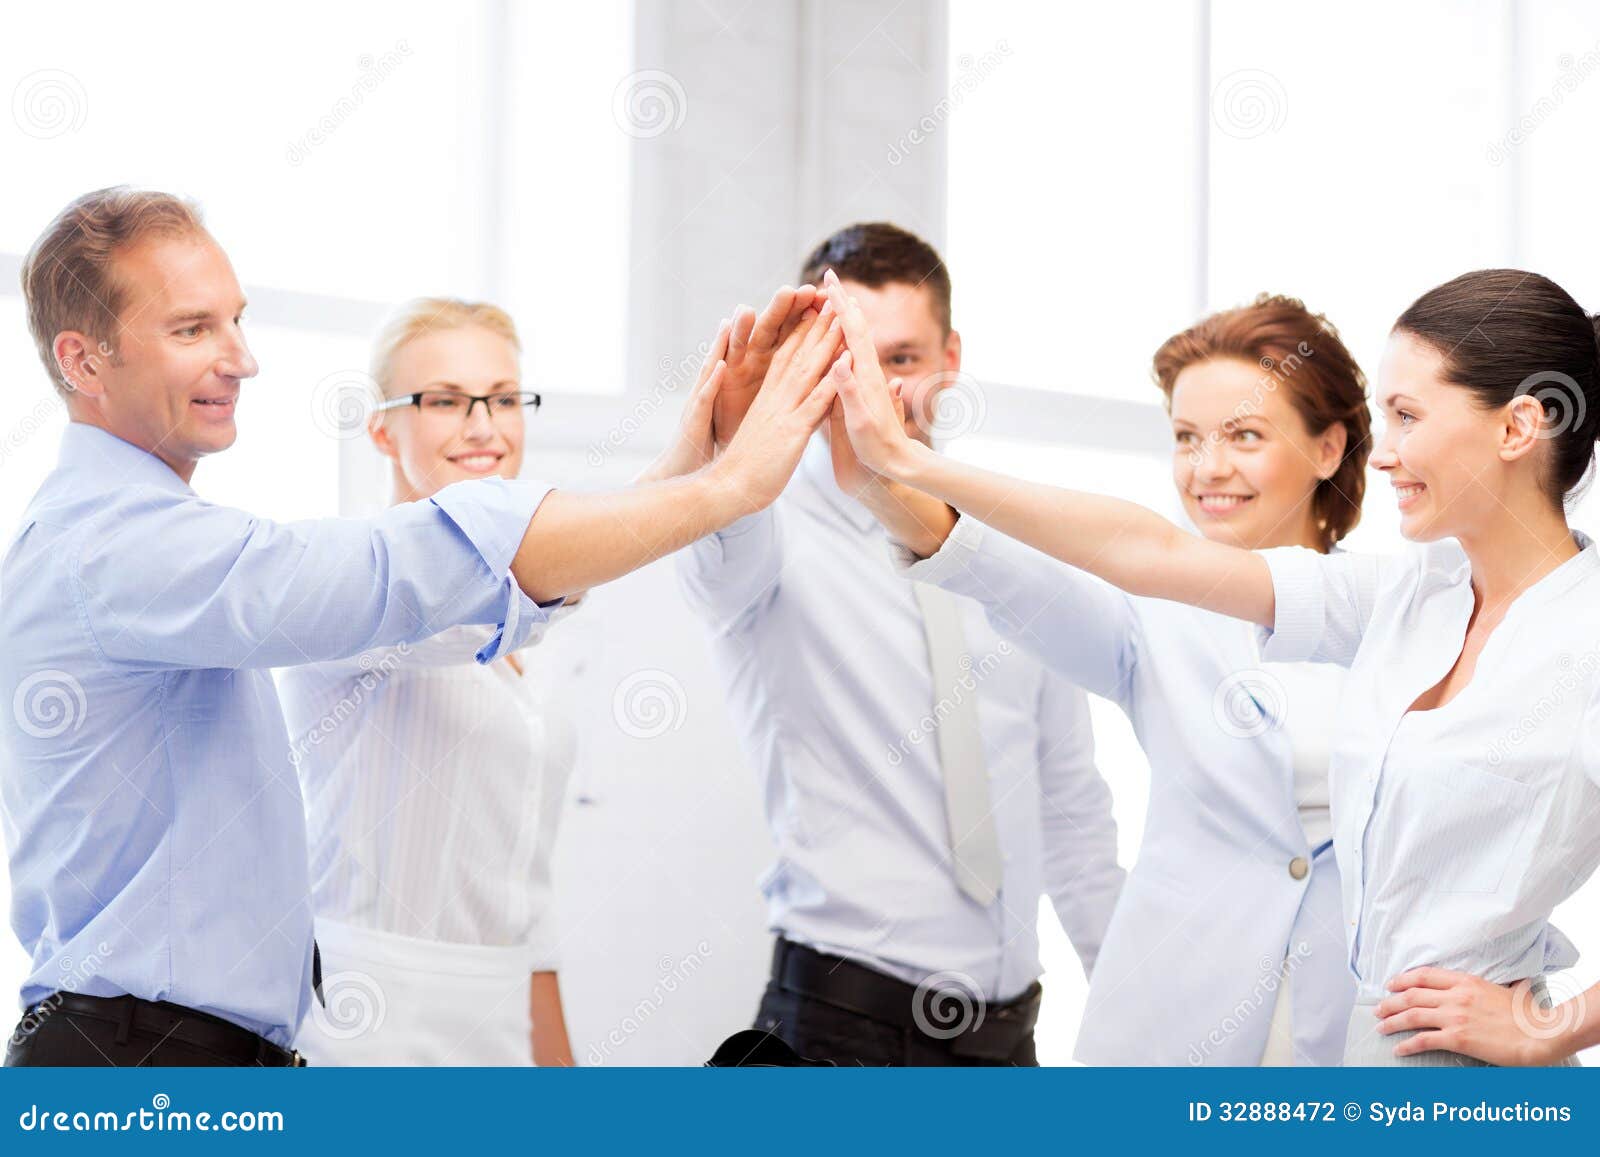 Business Team Celebrating Victory In Office Stock Photo ...
 Office Team Celebration